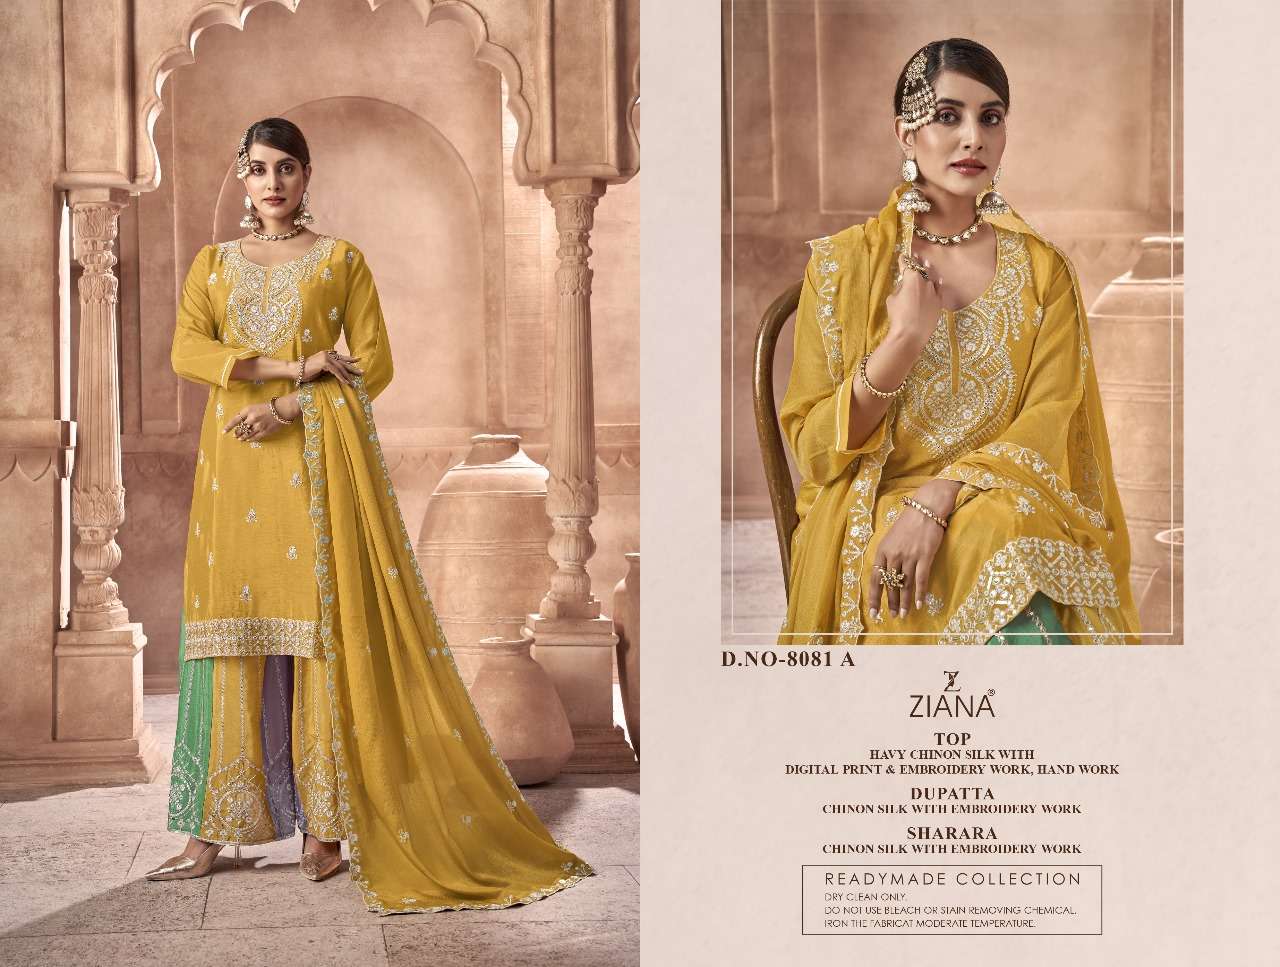 ZIANA 8081 BY ASLIWHOLESALE DESIGNER FACNY CHINON SILK HEAVY EMBROIDERY DRESSES